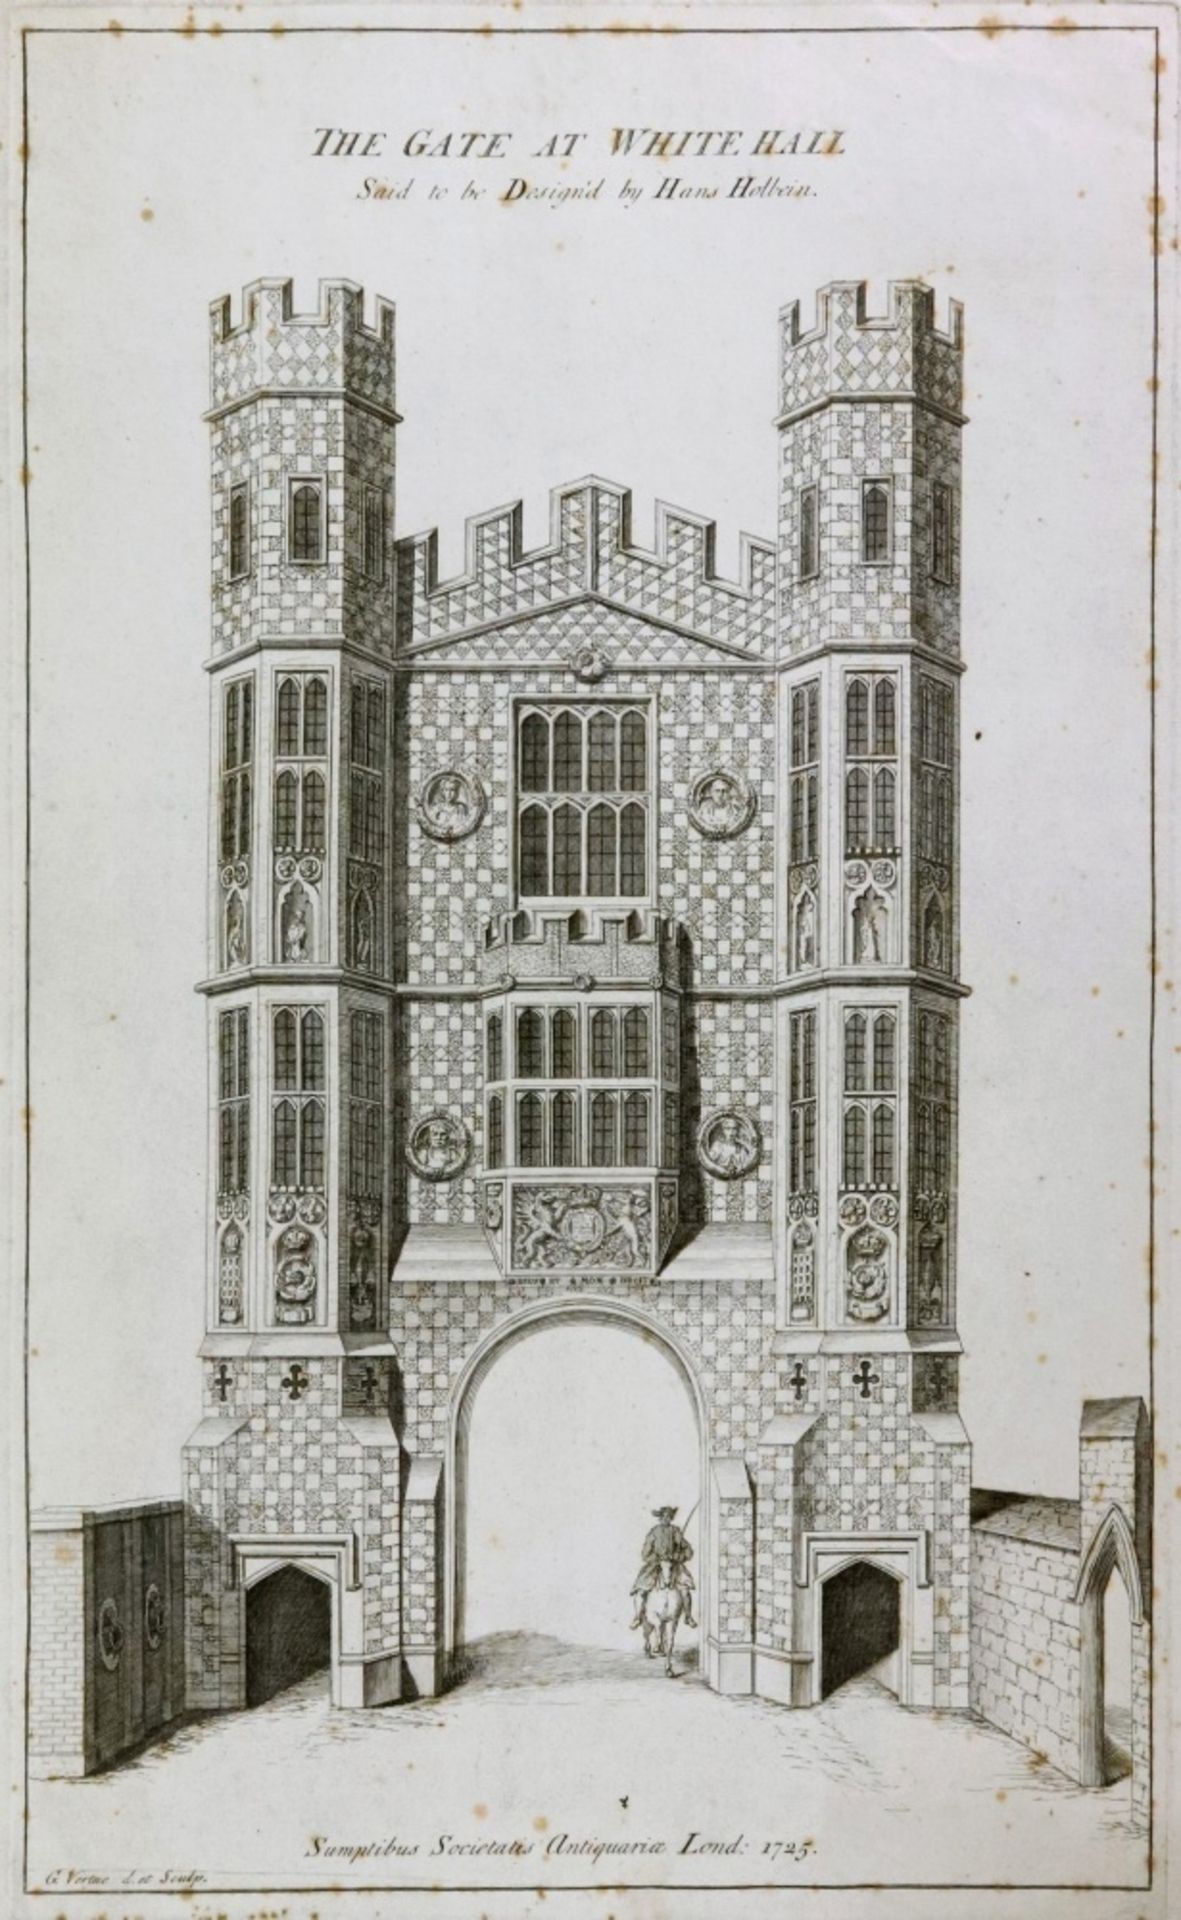 A collection of 13 prints and engravings of houses, buildings and aristocratic homes,